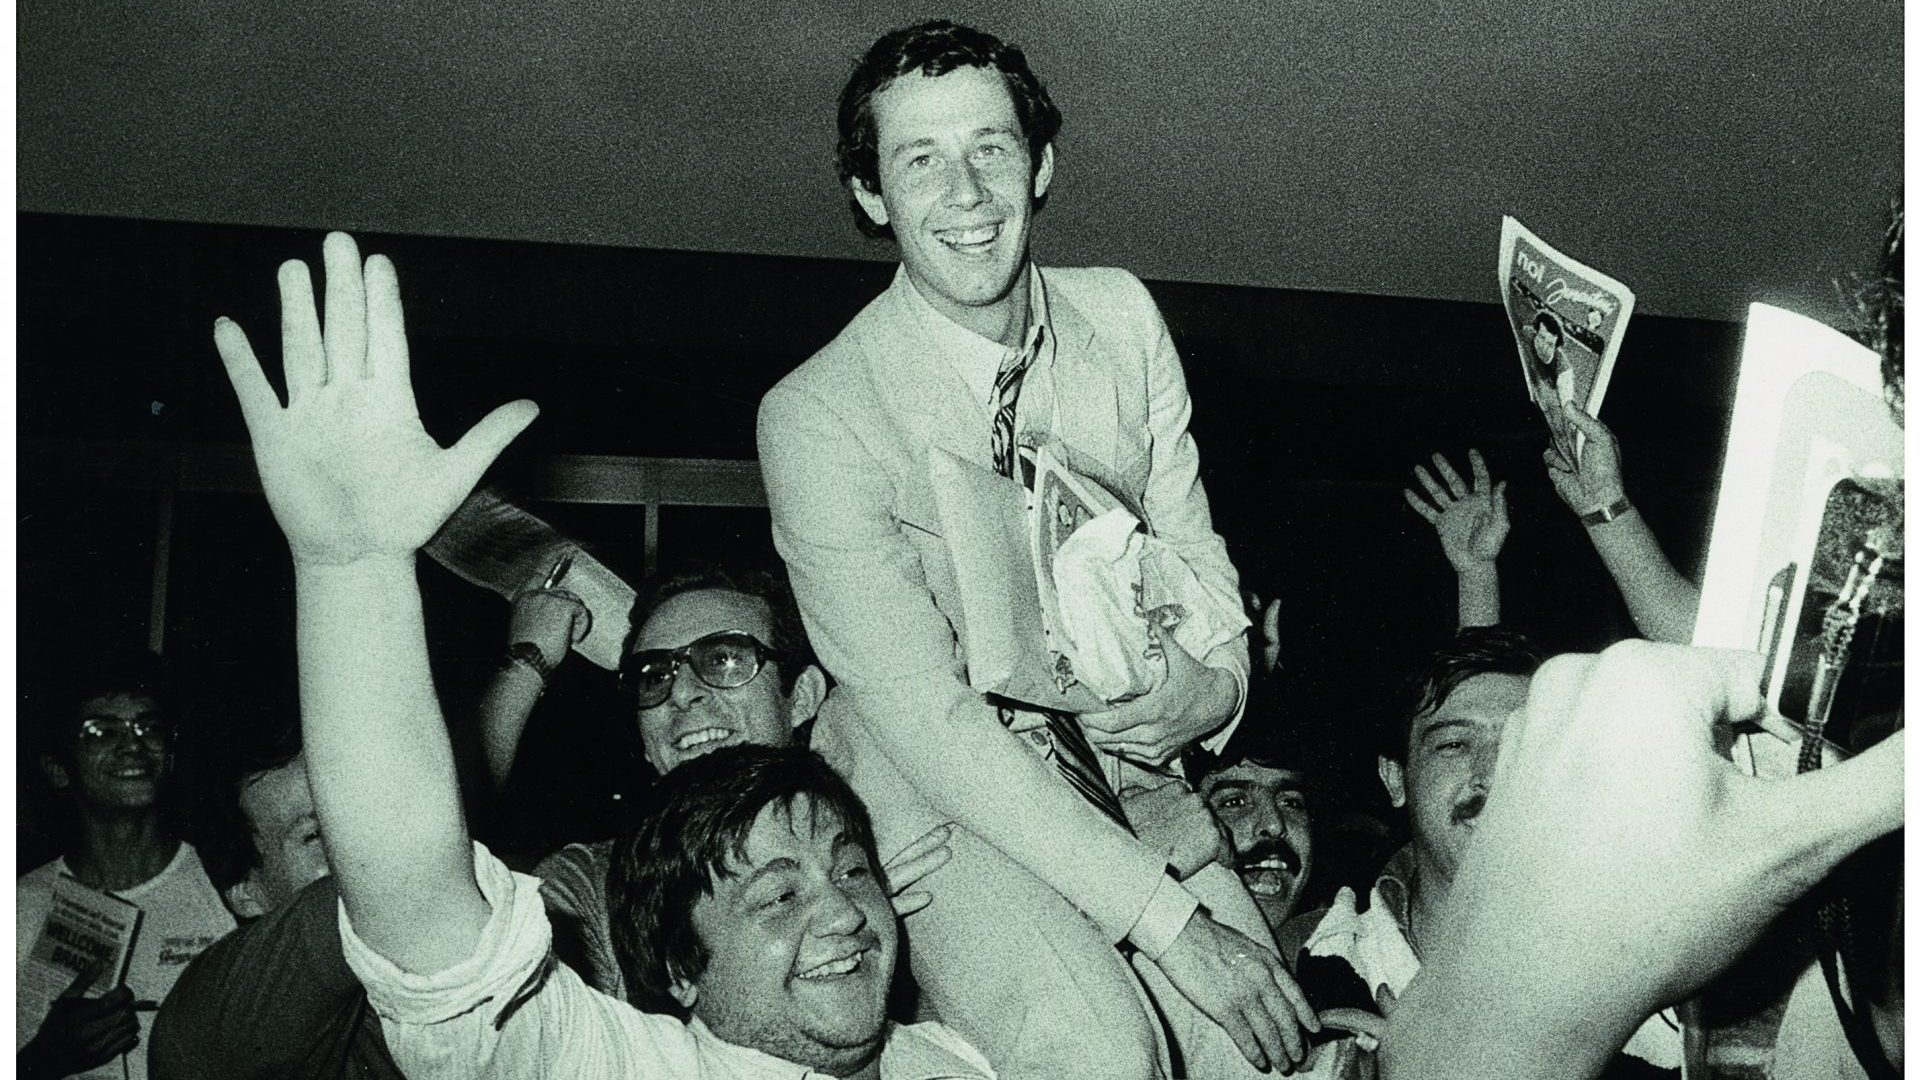 Liam Brady arrives at Turin Airport to join Juventus. He did not have to show his passport as he was carried through arrivals by Juve supporters. Photo: Eriu/Bonnier books